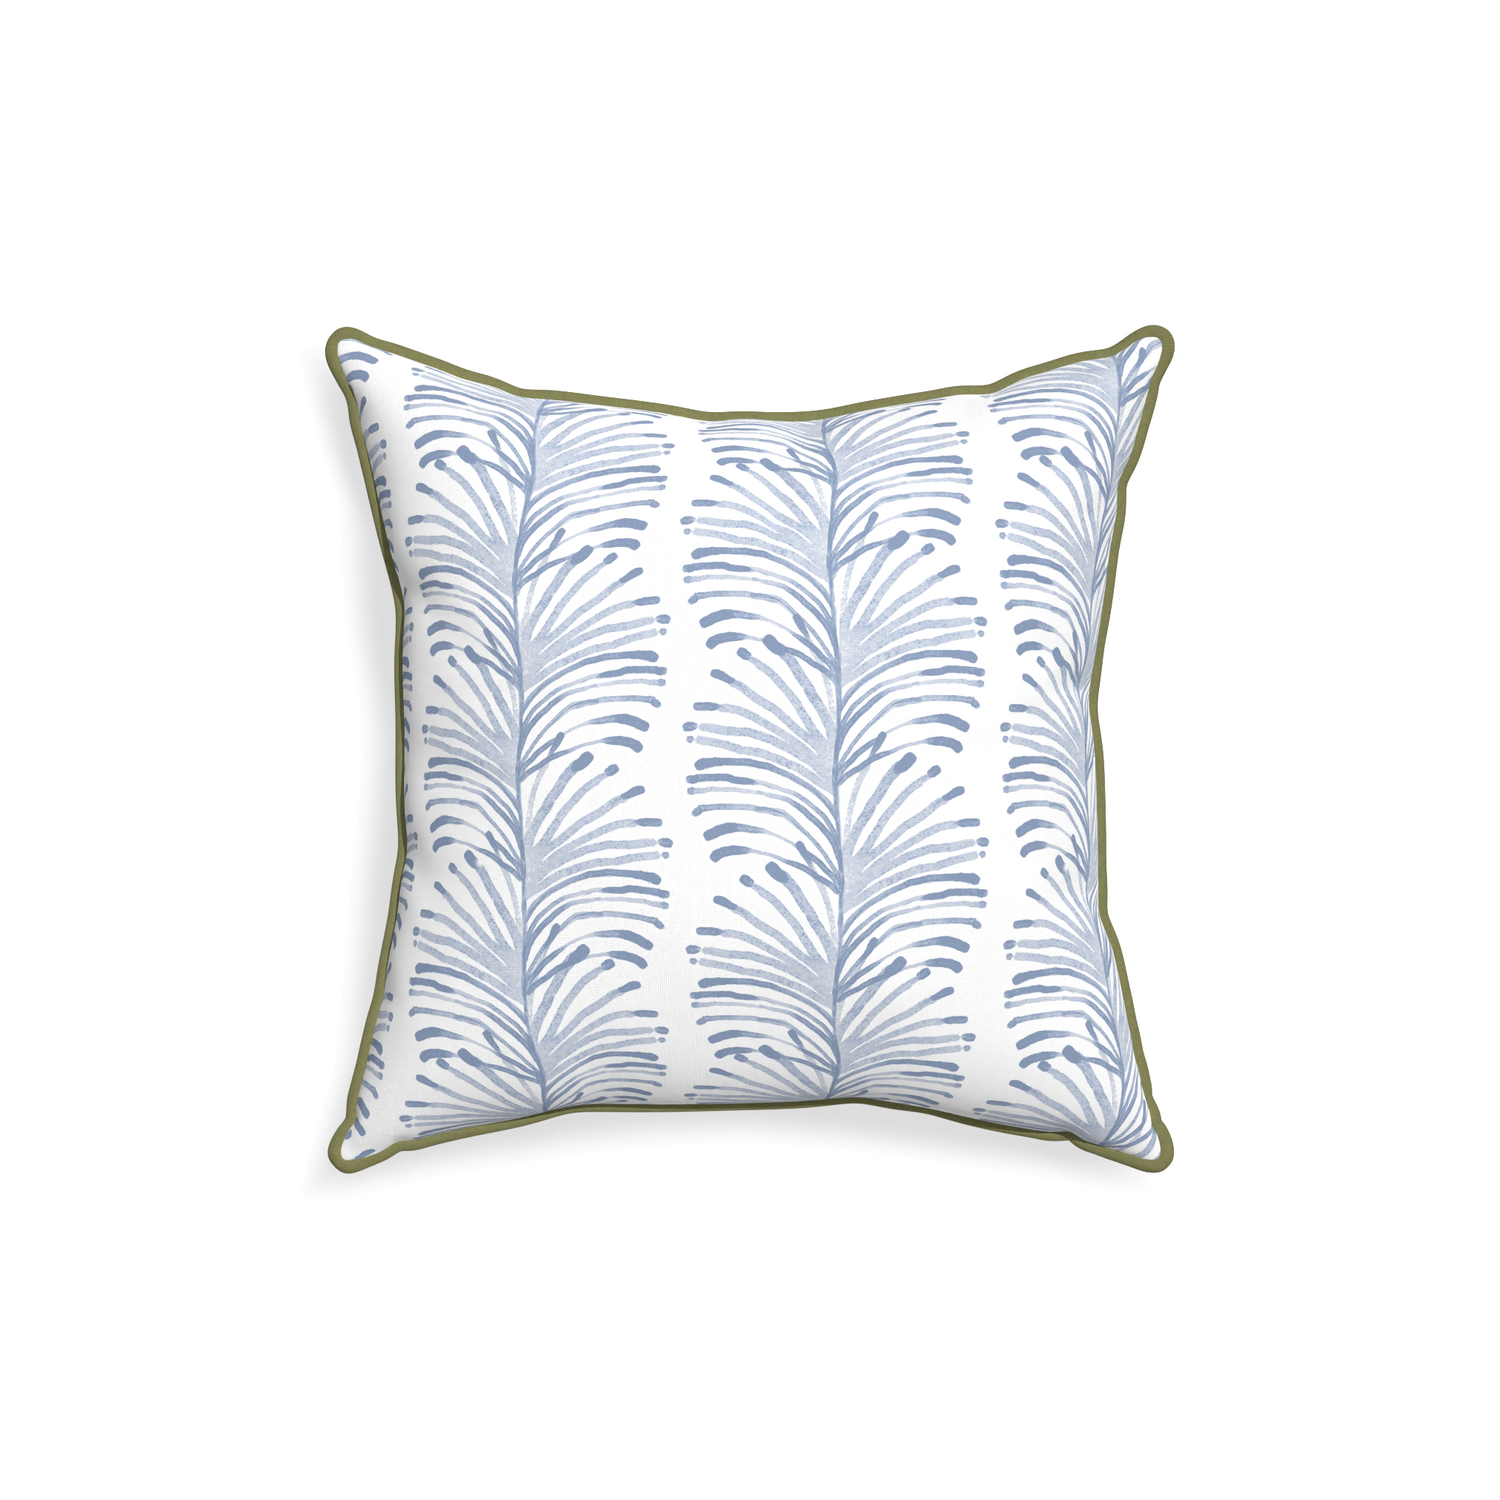 18-square emma sky custom pillow with moss piping on white background